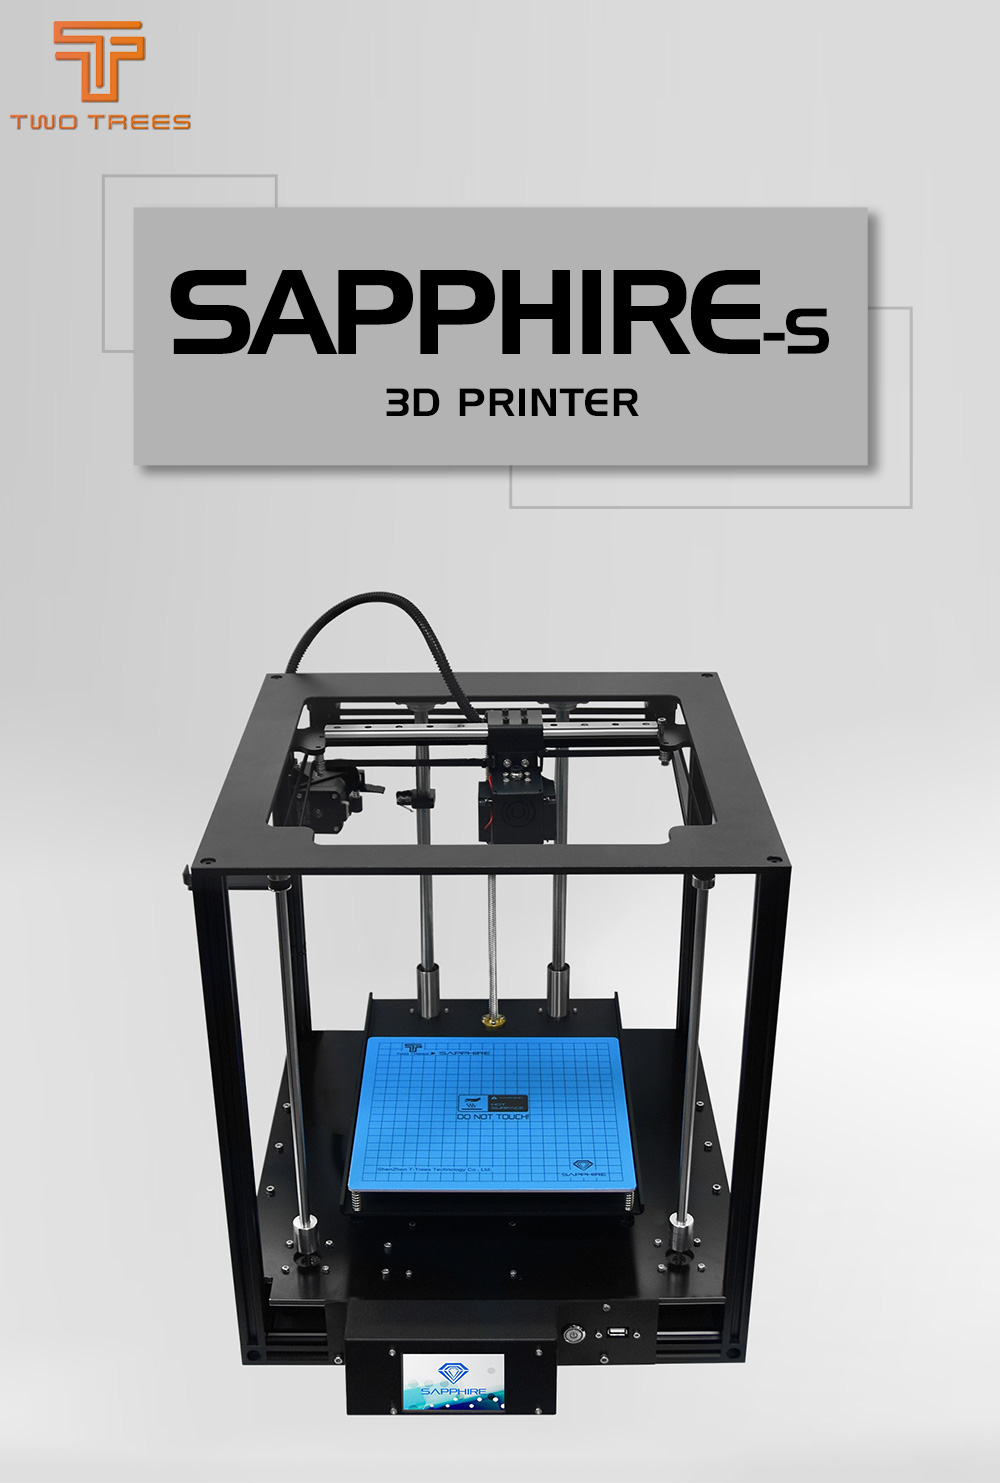 Two Trees® SAPPHIRE-S Corexy Structure Aluminium DIY 3D Printer 200*200*200mm Printing Size With Lerdge-X Mainboard/Auto-leveling/Power Resume Function/Off-line Print/3.5 inch Touch Color Screen 6